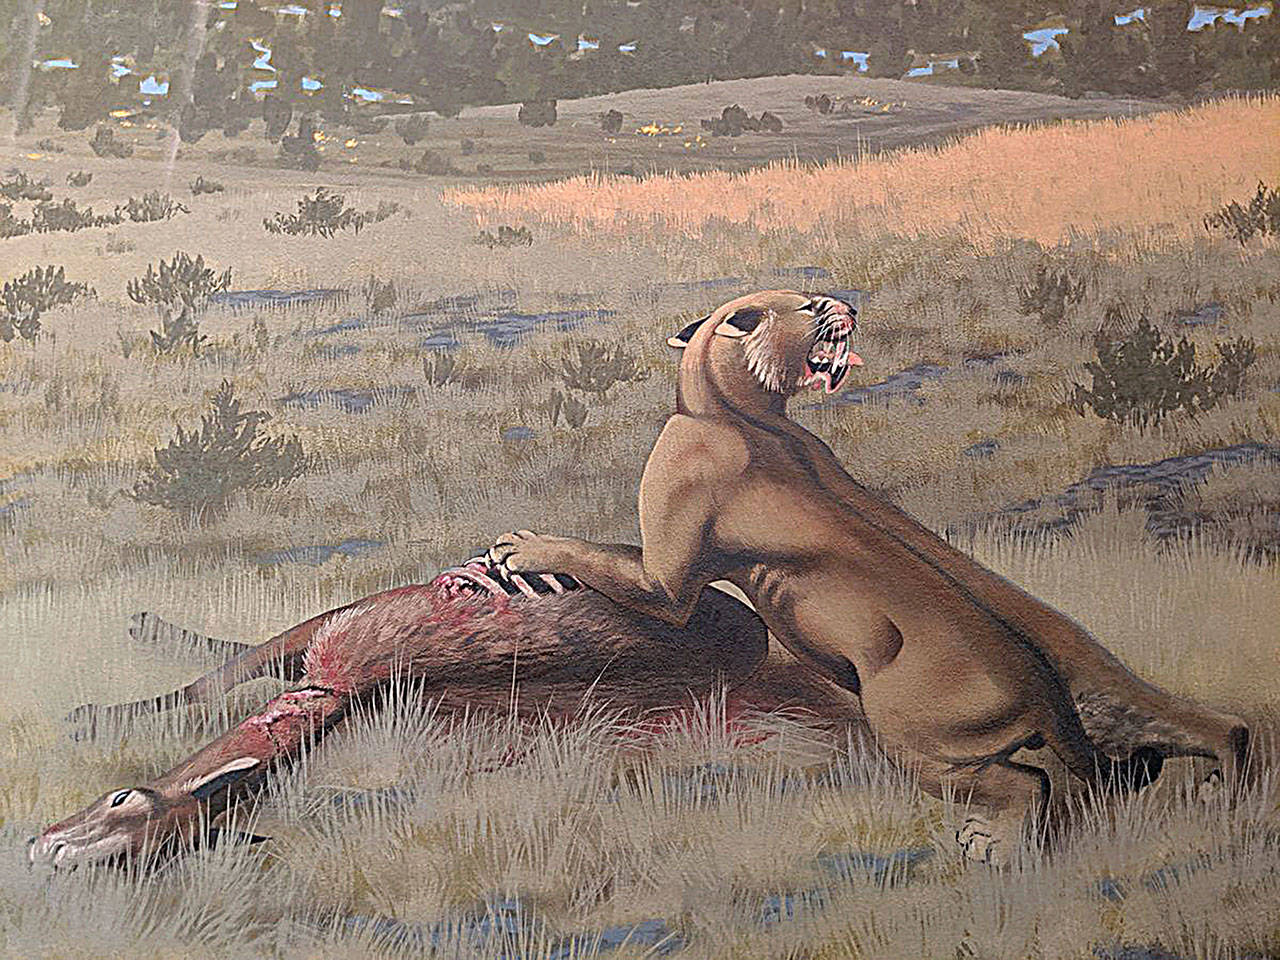 An artist’s depiction of Machairodus lahayishupup eating Hemiauchenia, a camel relative. The image is part of a mural of the Rattlesnake Formation of central Oregon, where fossils of the newly identified species have been found. The mural is exhibited at John Day Fossil Beds National Monument, part of the National Park Service. (Image courtesy of Ohio State Univ.)